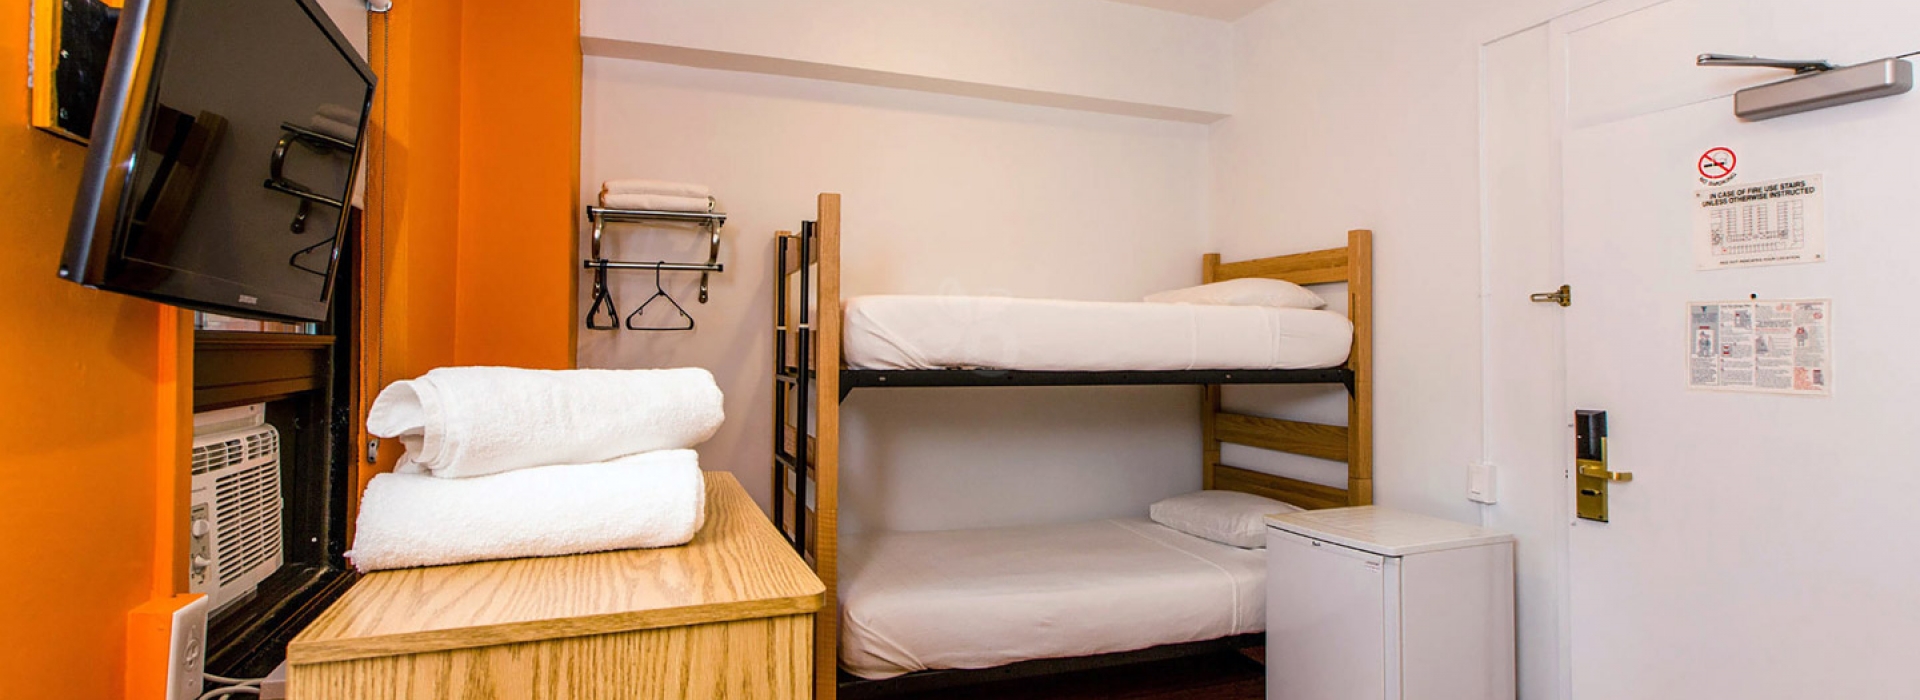 Hotel Hostel Rooms In New York City Guest Rooms At Nyc S